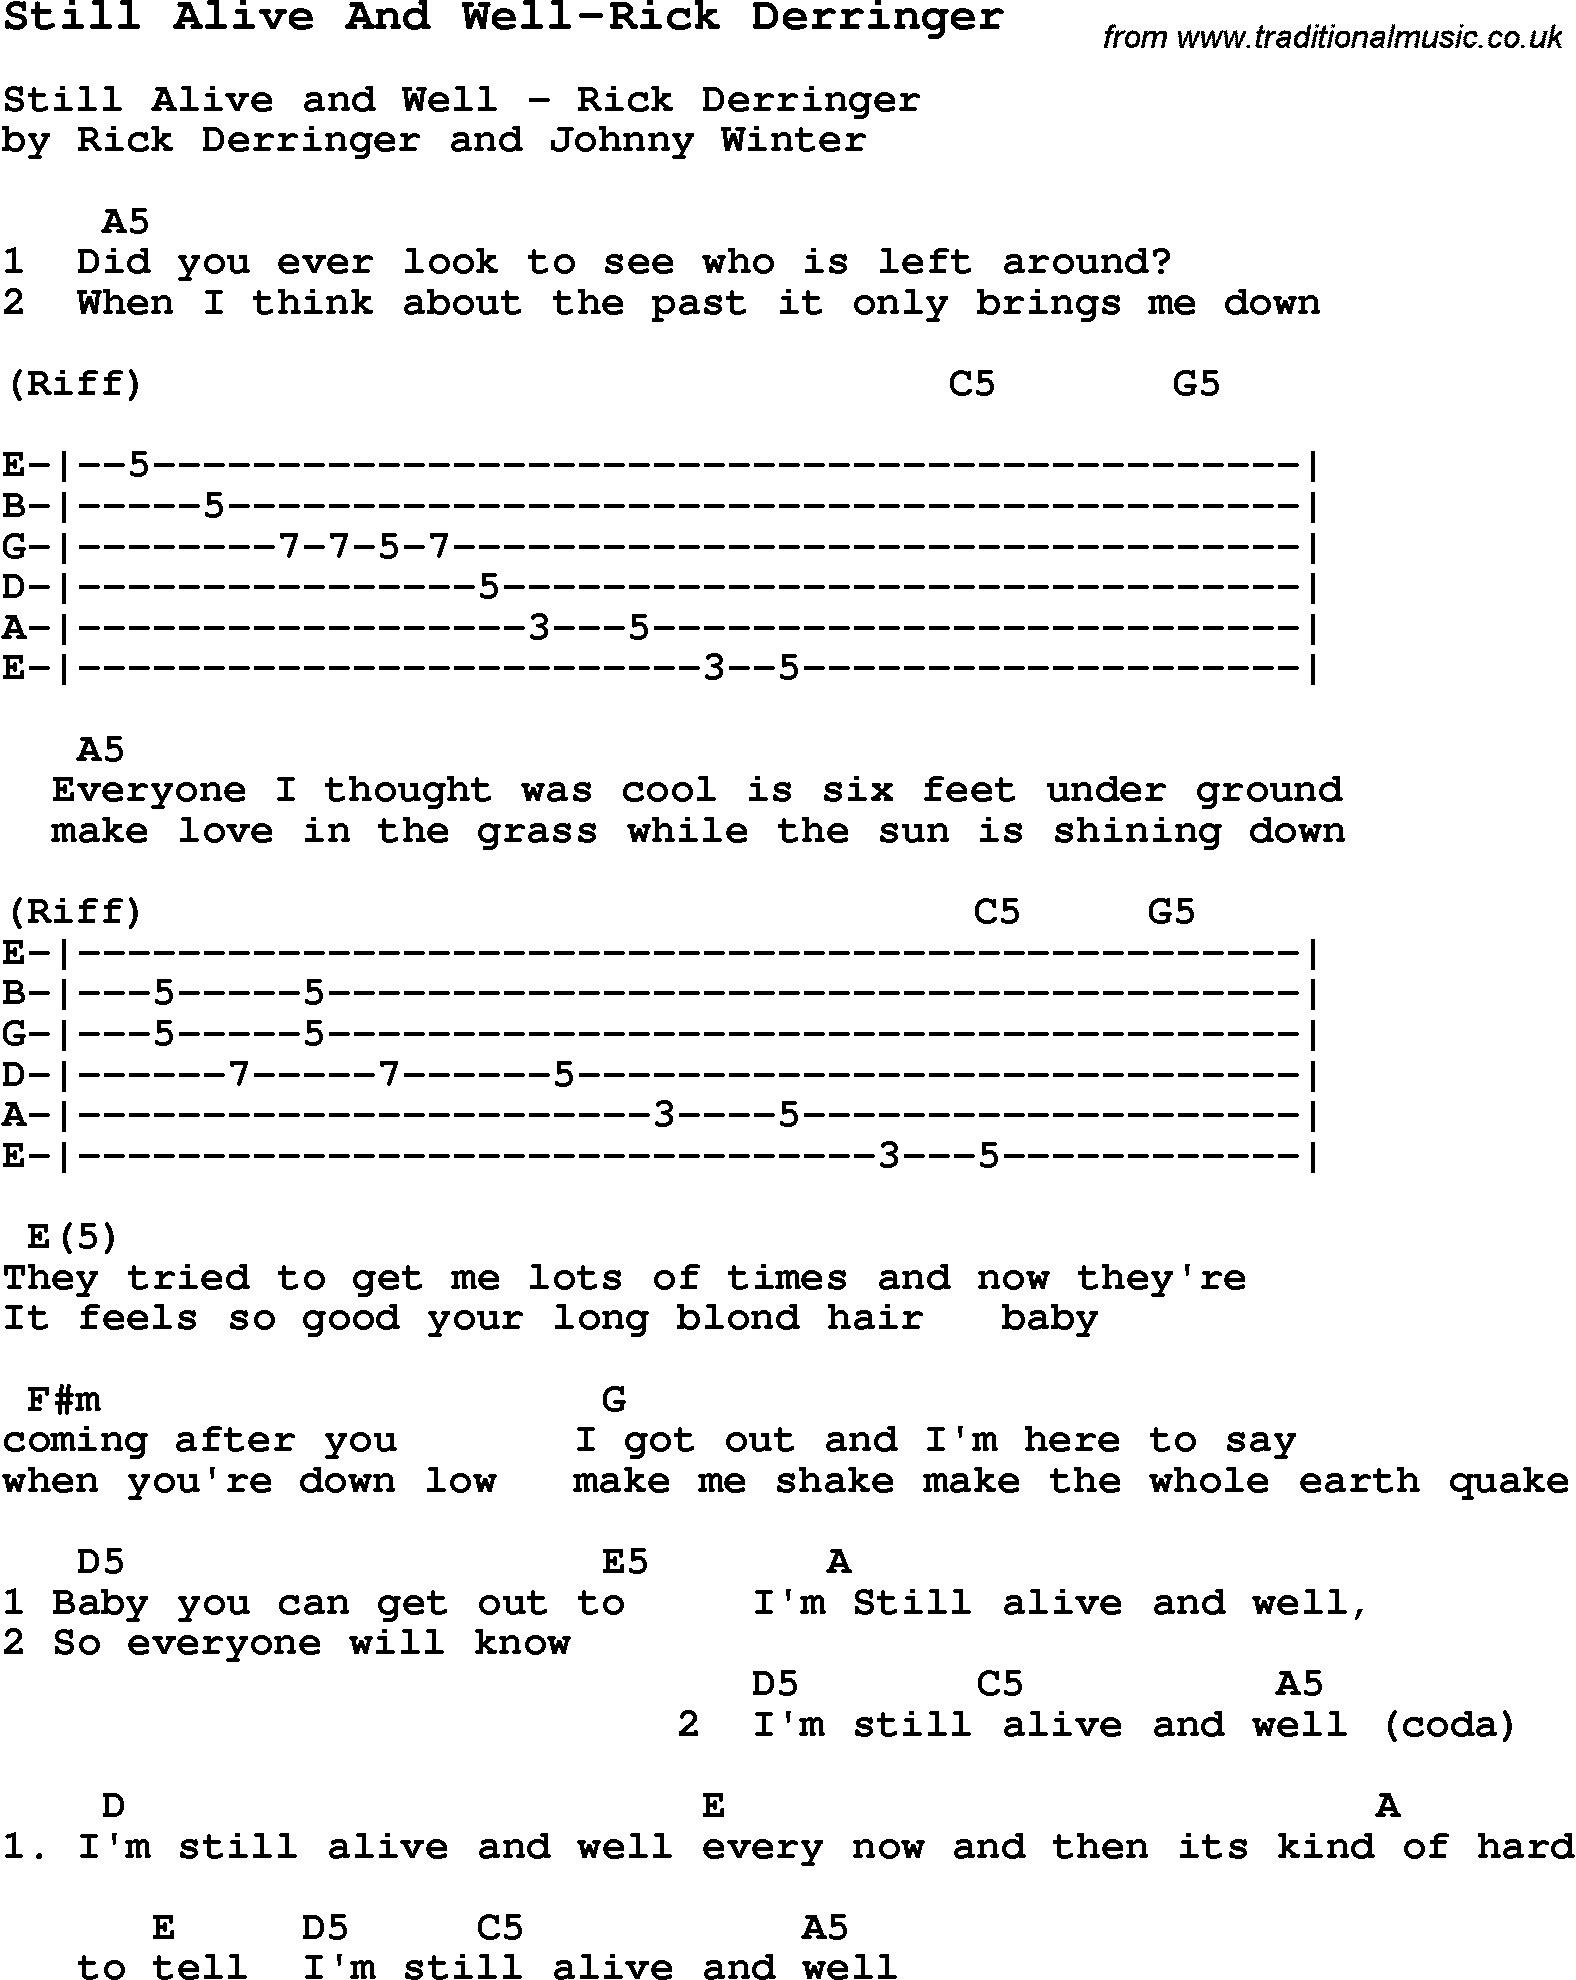 Blues Guitar Song, lyrics, chords, tablature, playing hints for Still Alive And Well-Rick Derringer